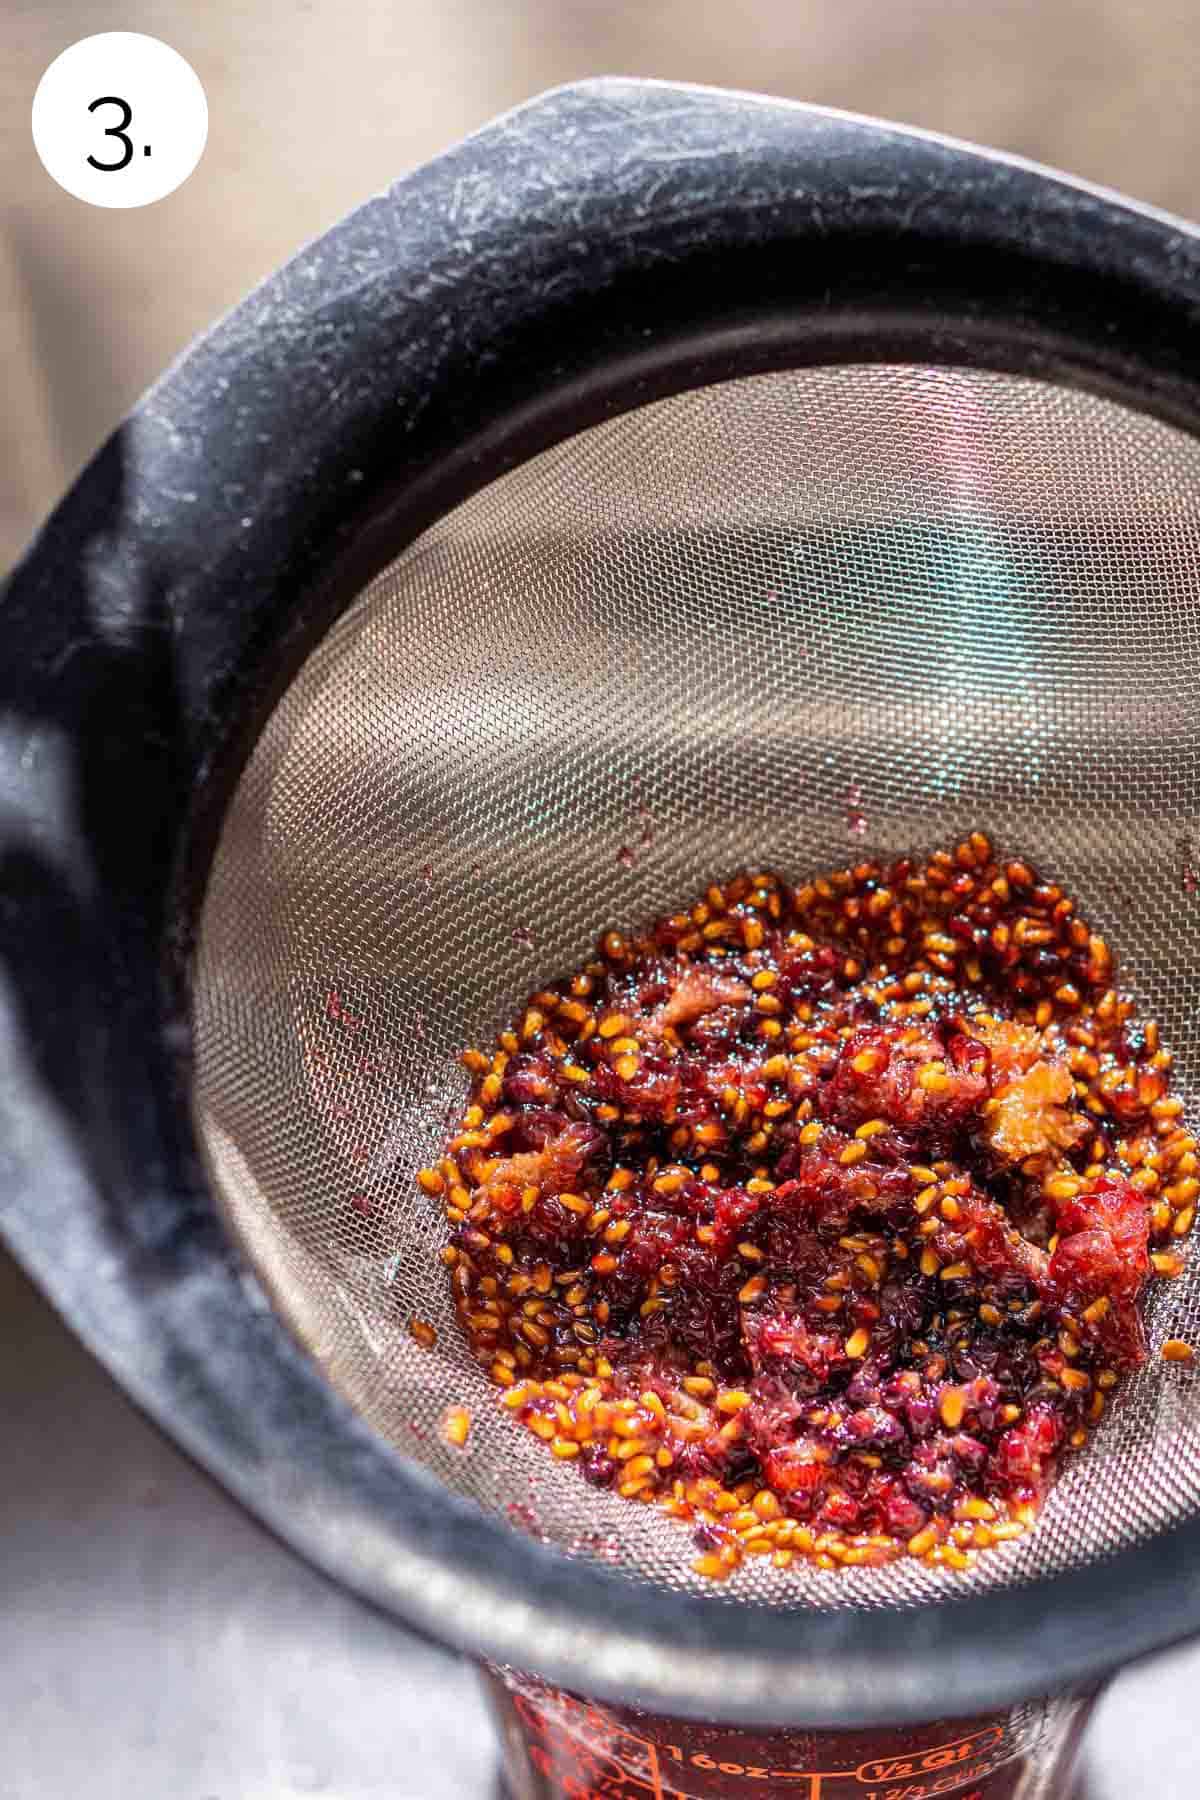 Straining the crushed blackberries in a fine-mesh sieve over a measuring cup in the kitchen sink.